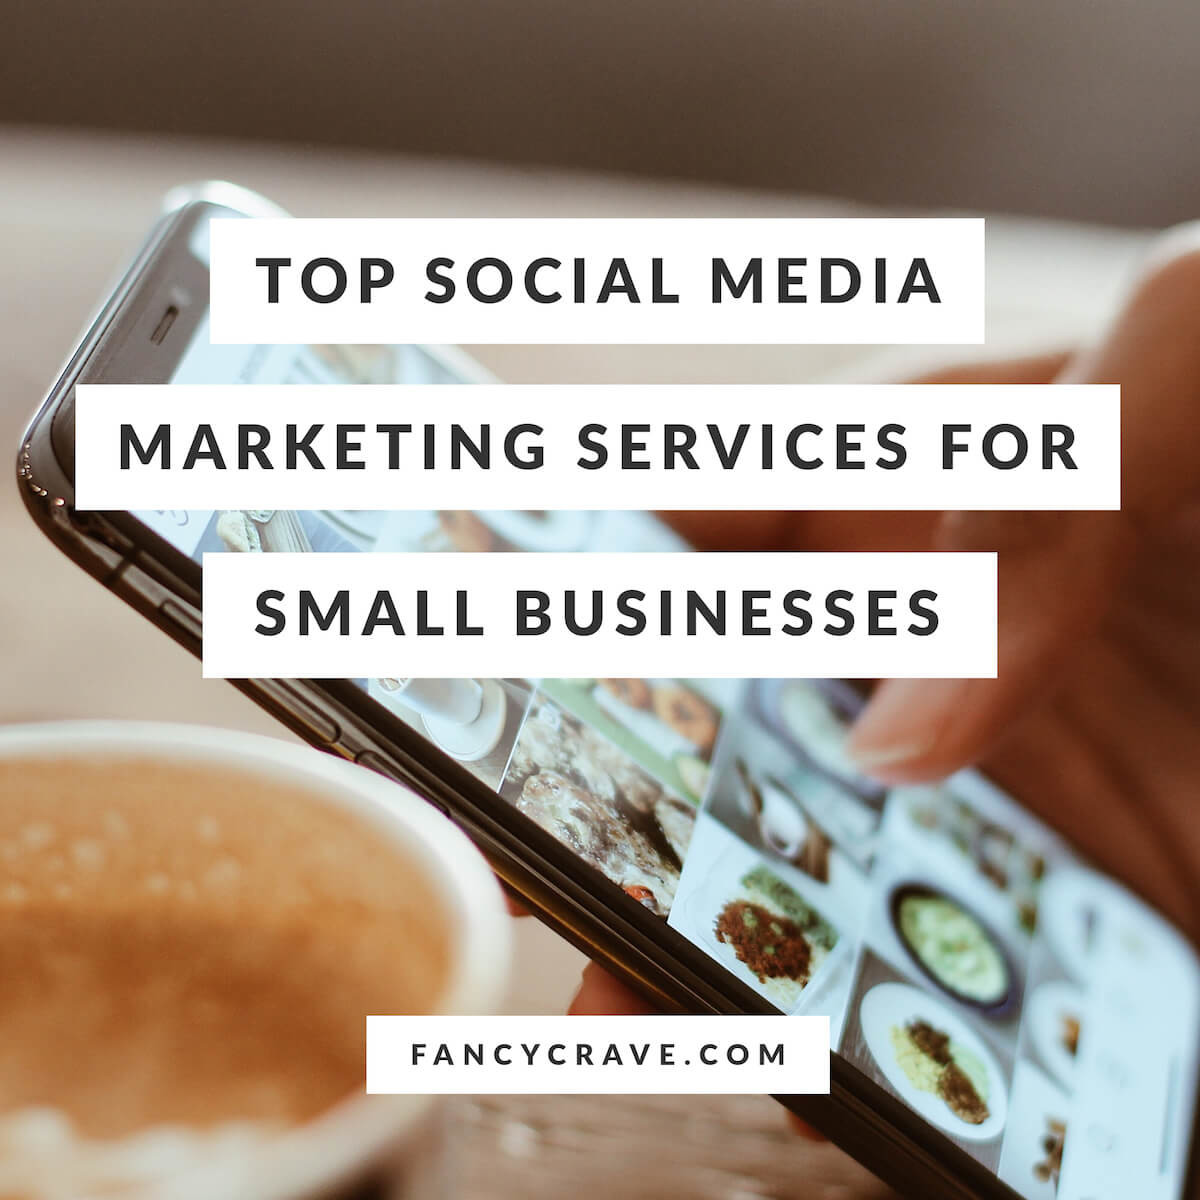 Top Social Media Marketing Services For Small Businesses